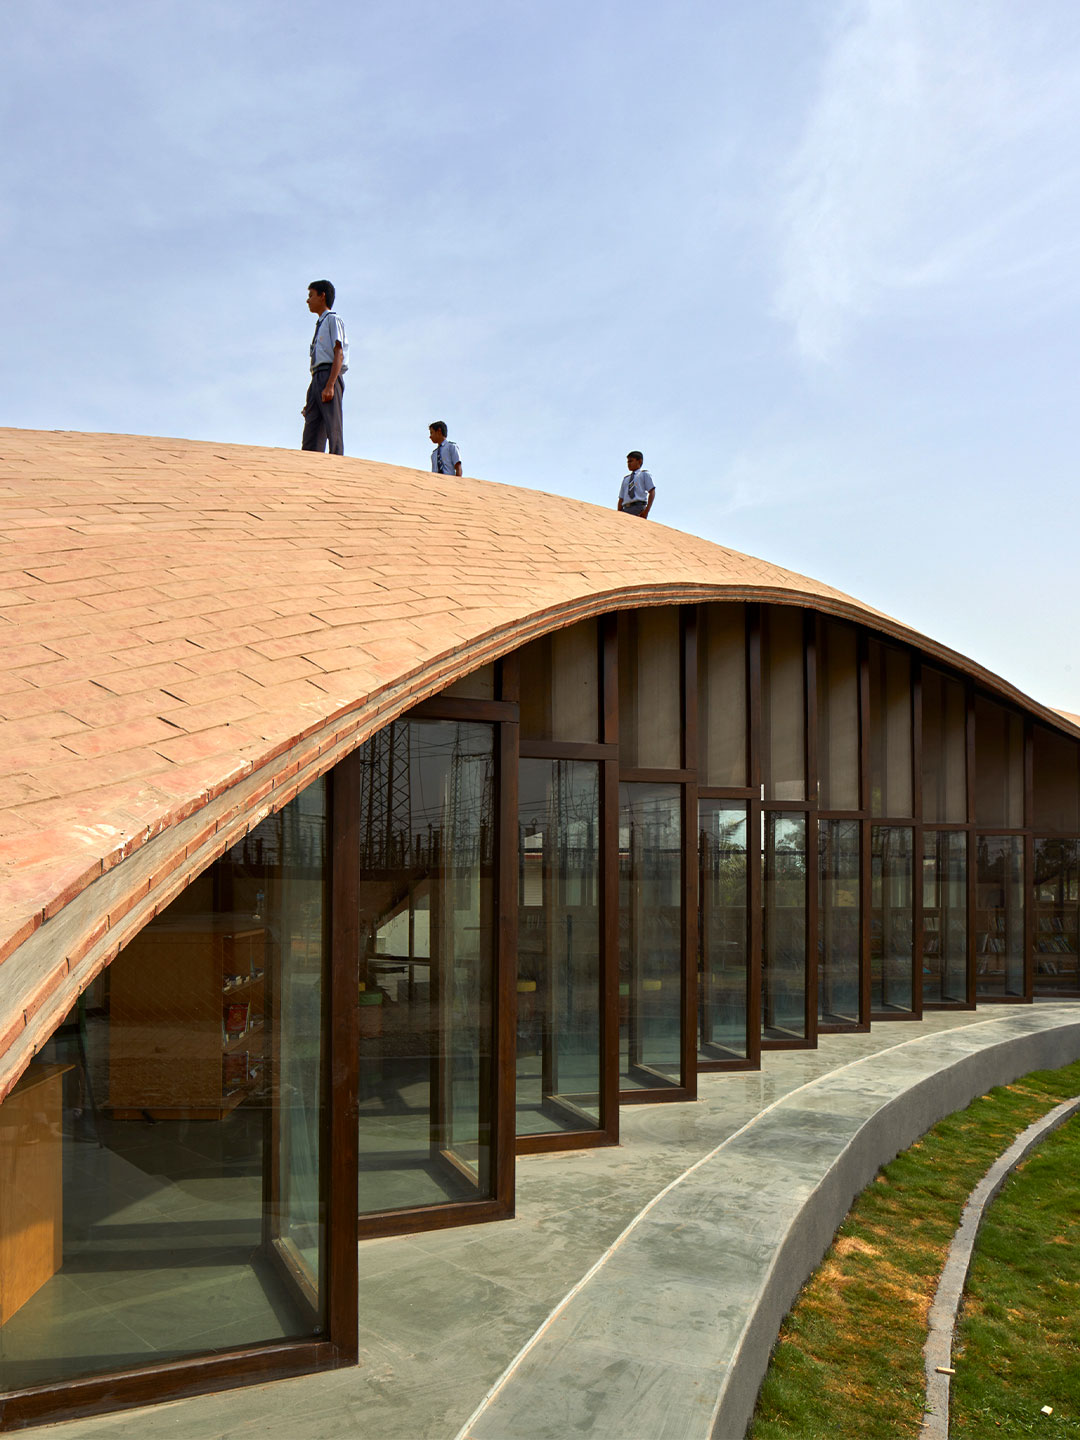 Designed by Sameep Padora & Associates, the Maya Somaiya Library in India rests at the intersection of students' daily routine. 